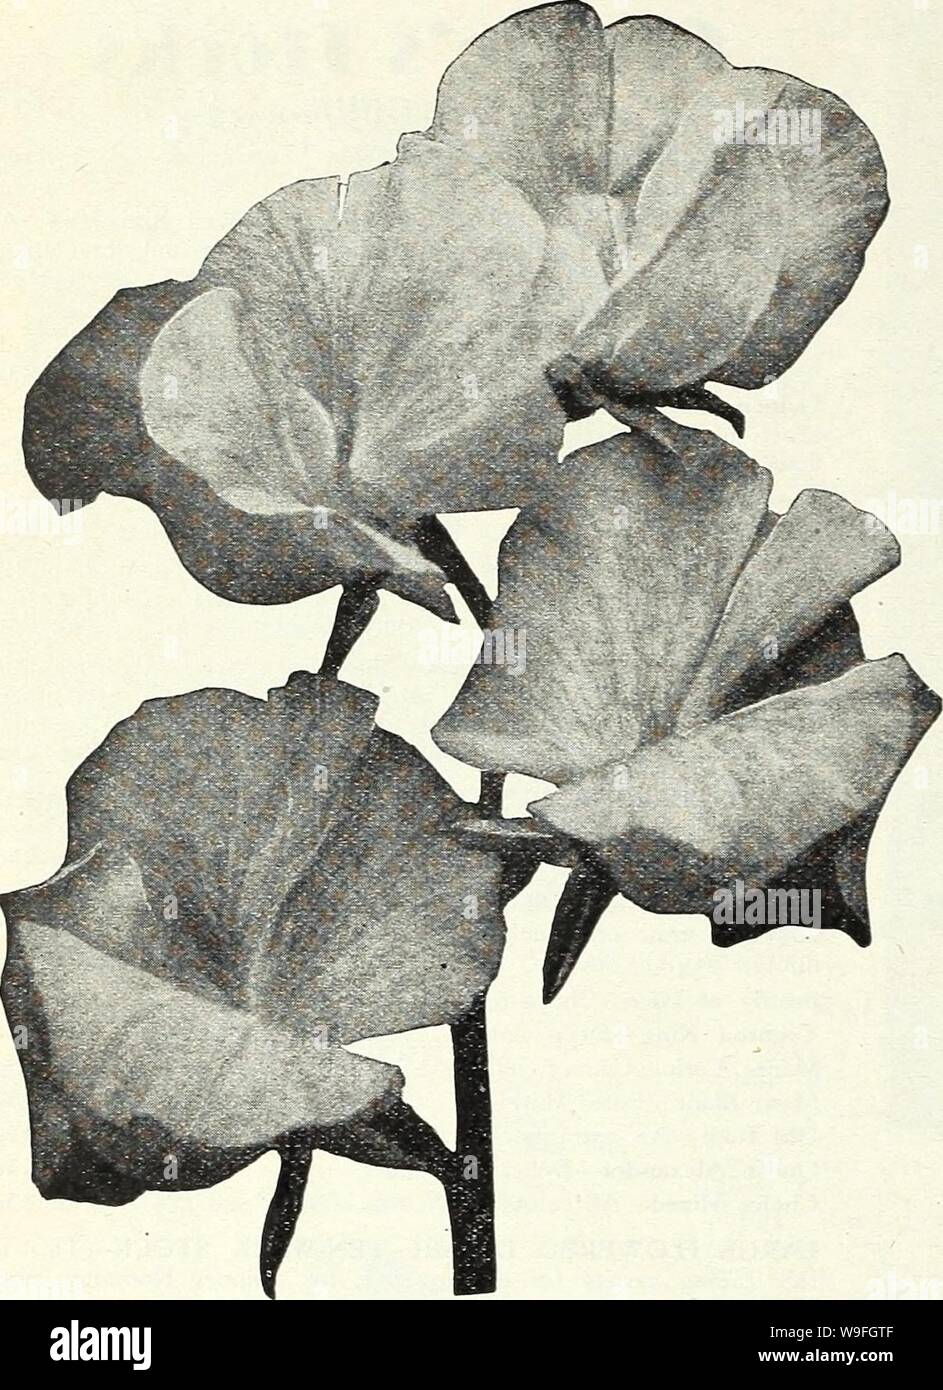 Archive image from page 41 of Currie Bros  fifty-eighth year. Currie Bros. : fifty-eighth year 1933  curriebrosfiftye19curr Year: 1933 ( Page 38 CURRIE BROTHERS CO.    Sweet Peas Beautiful, Fragrant, Fashionable HOW TO GROW THEM—Sweet Peas should be planted as early in spring as the ground can be workedj Rich loam with an abundance of well rotted manure is an ideal soil. A trench about 6 inches deep should be made, sowing the seed thinly in the bottom, and cover with an inch of soil, pressing it down firmly. Gradually fill in the trench as the plants grow, and thin out to 2 to 4 inches apart. Stock Photo